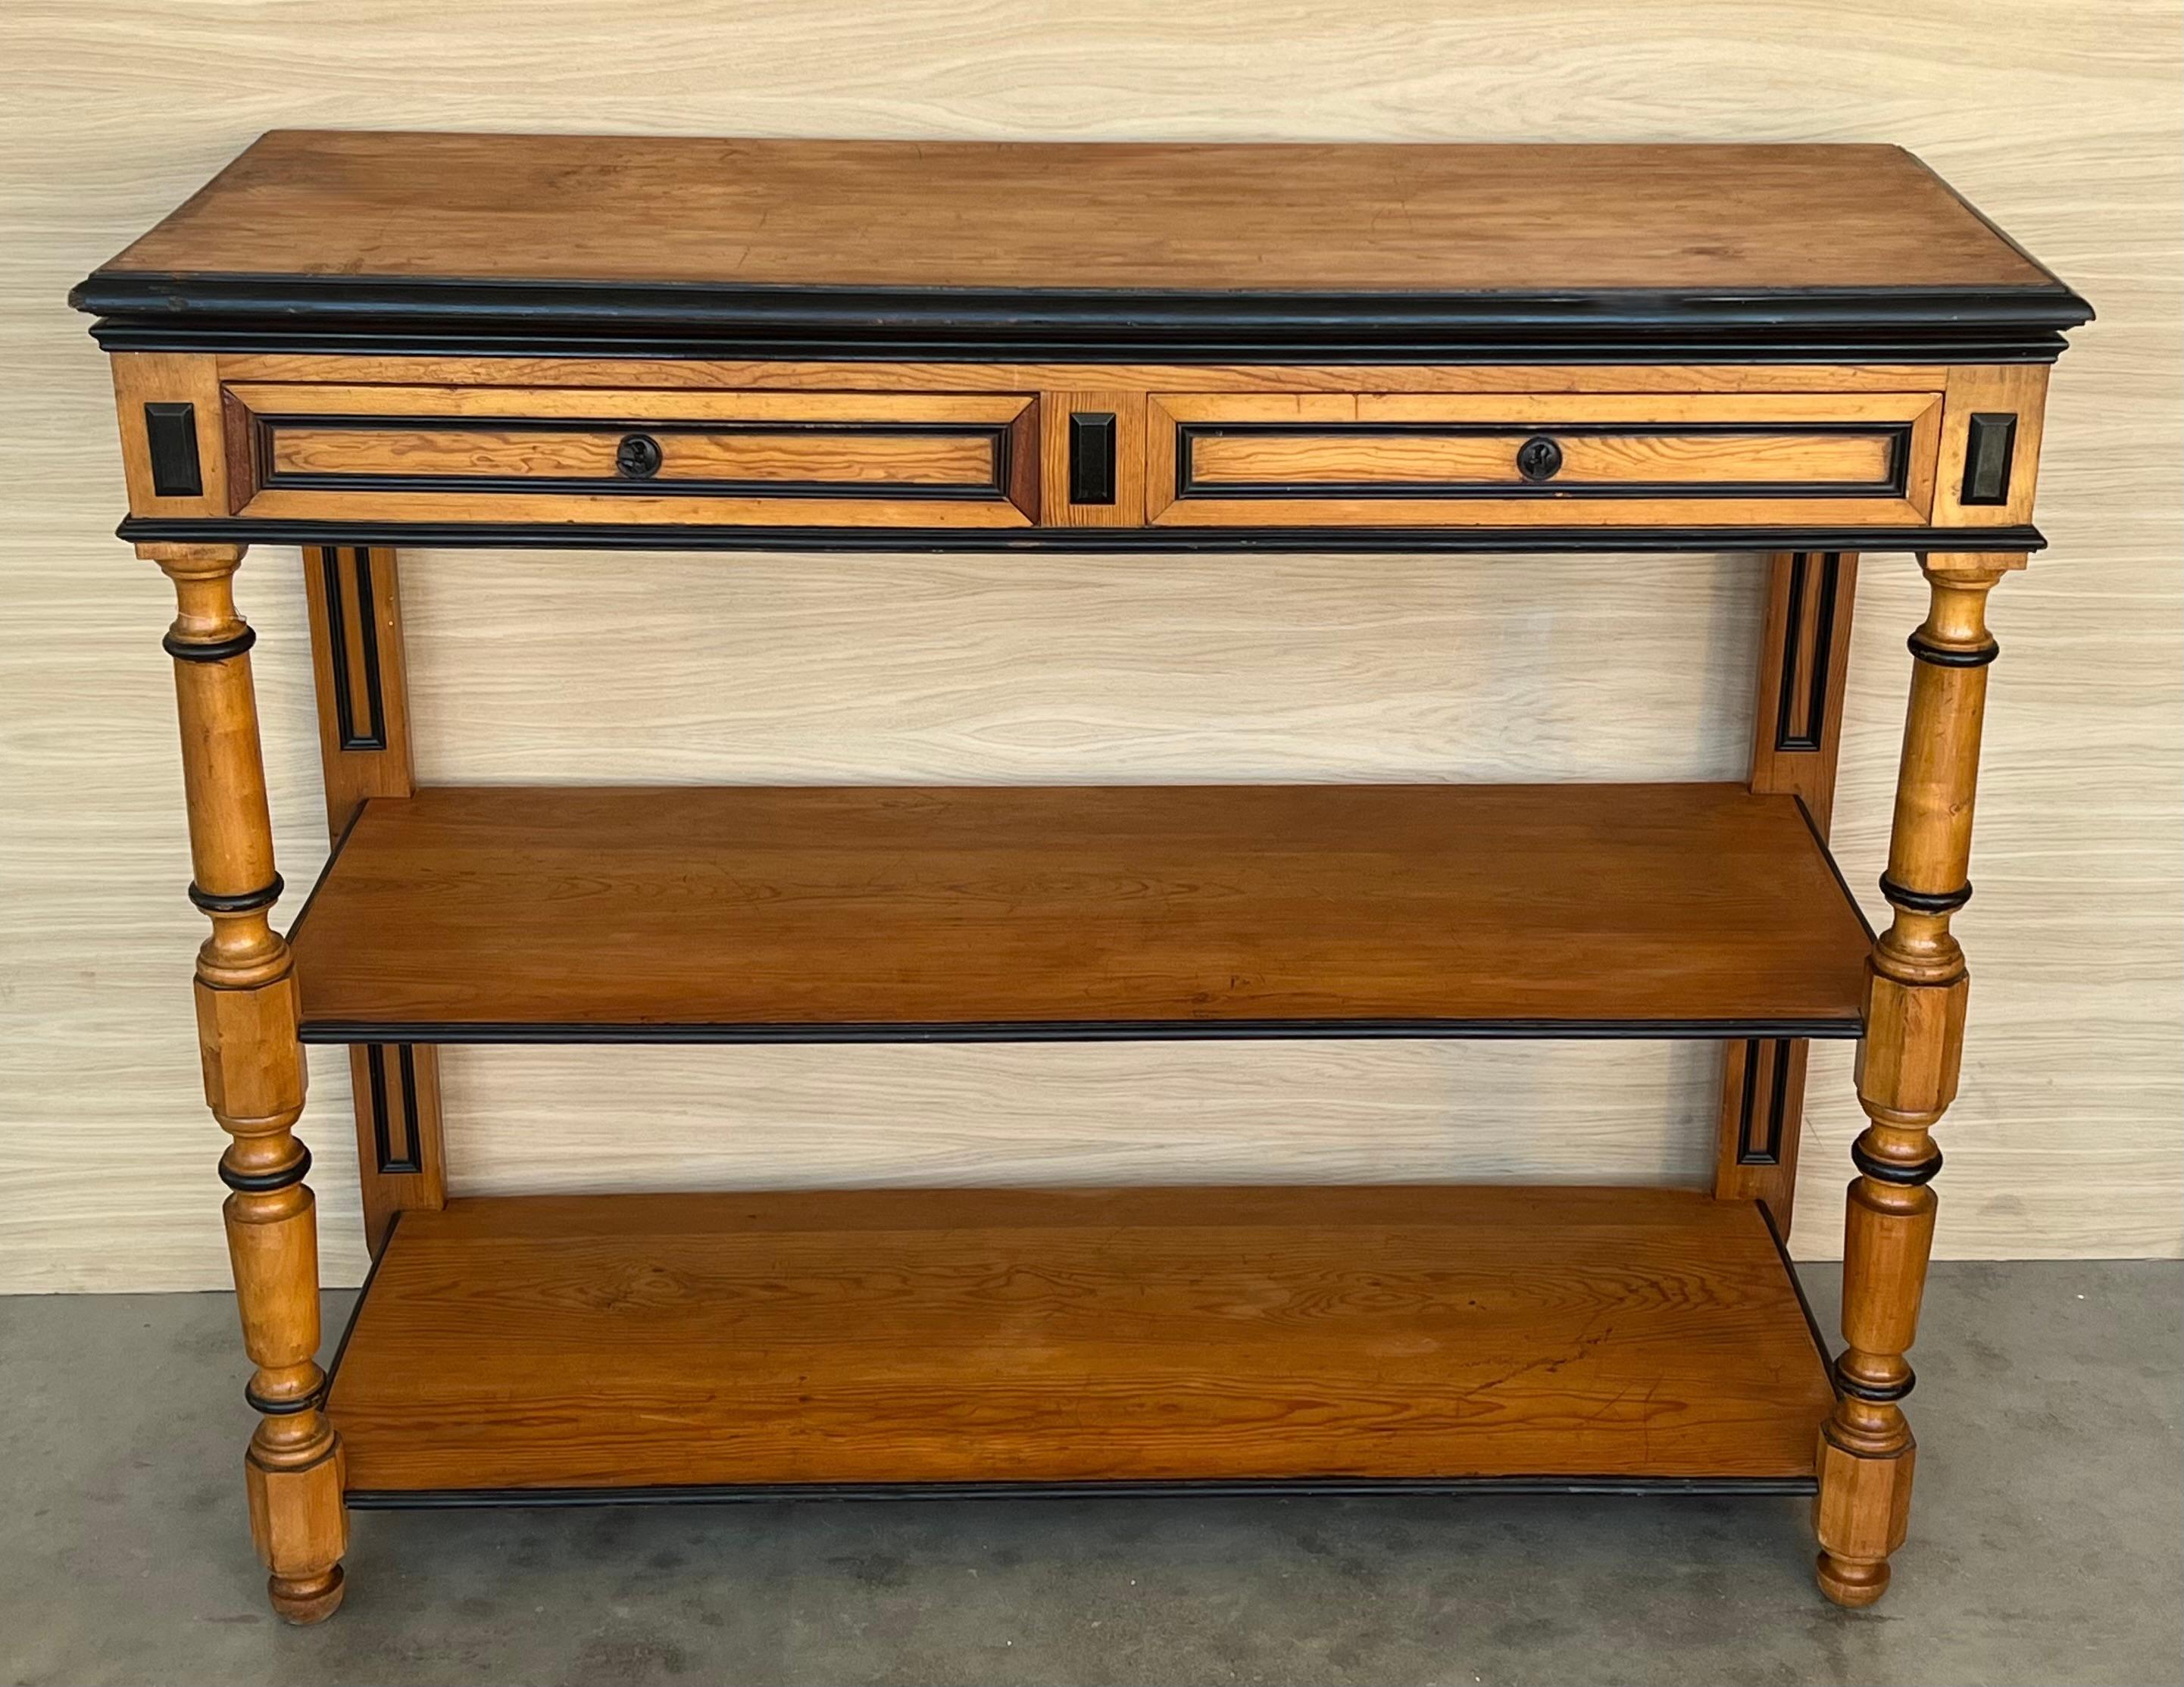 Early 20th C English Lemontree Three Tier Server or Buffet with Drawers For Sale 2